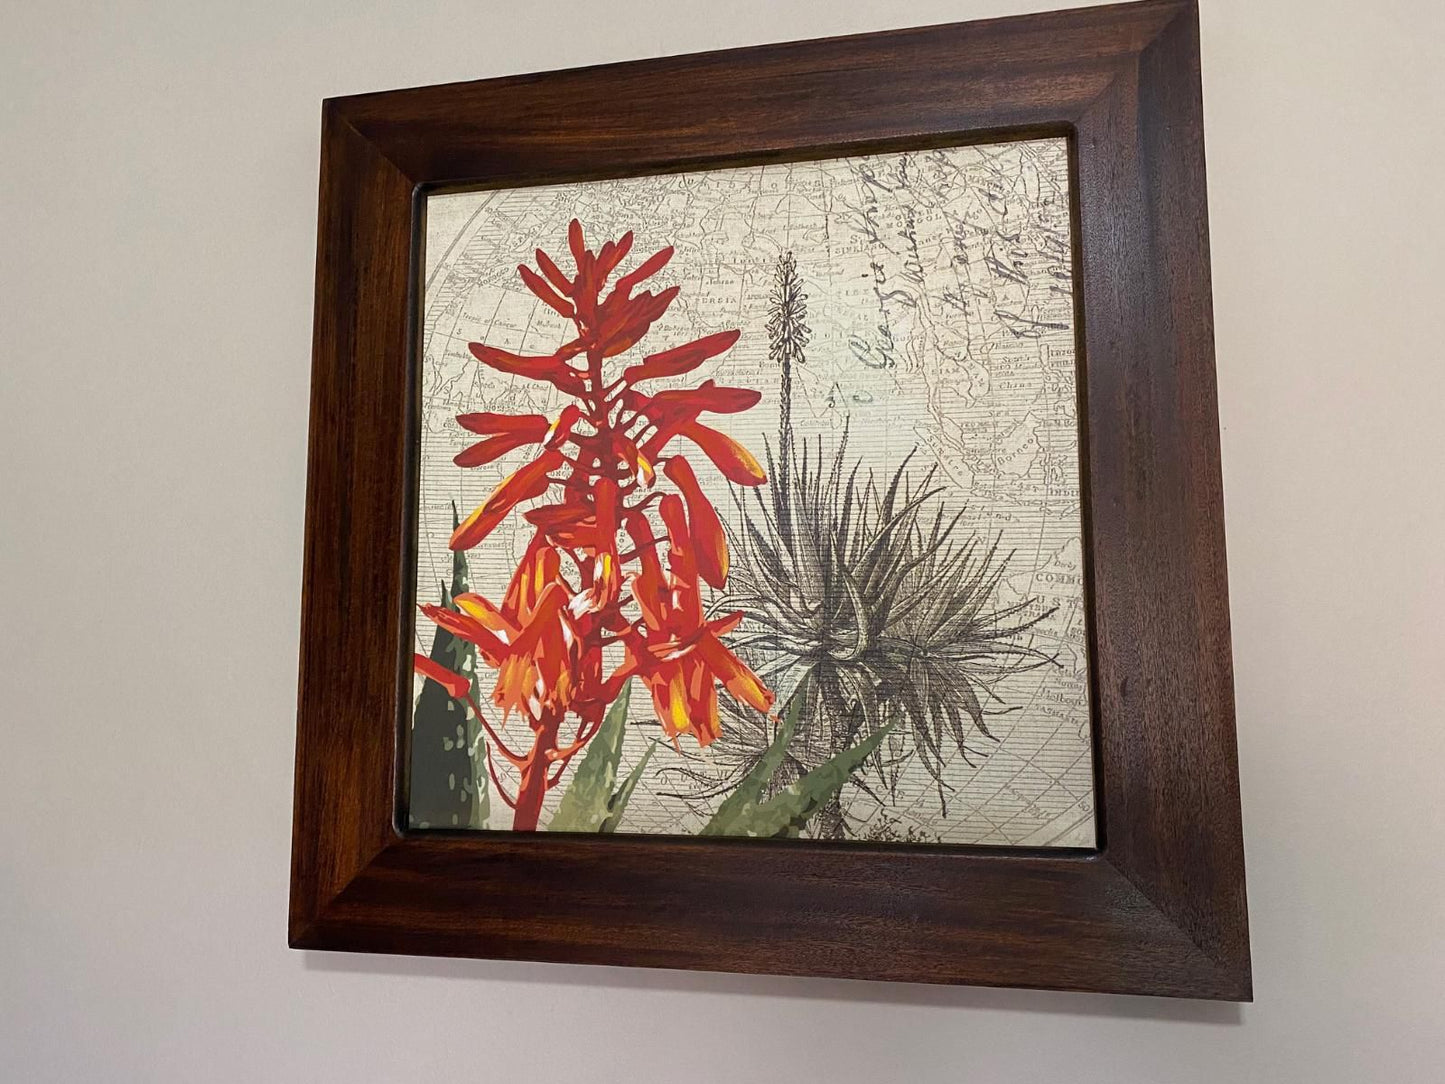 Allegro Guest House Bloemfontein Bayswater Bloemfontein Free State South Africa Plant, Nature, Art Gallery, Art, Painting, Picture Frame